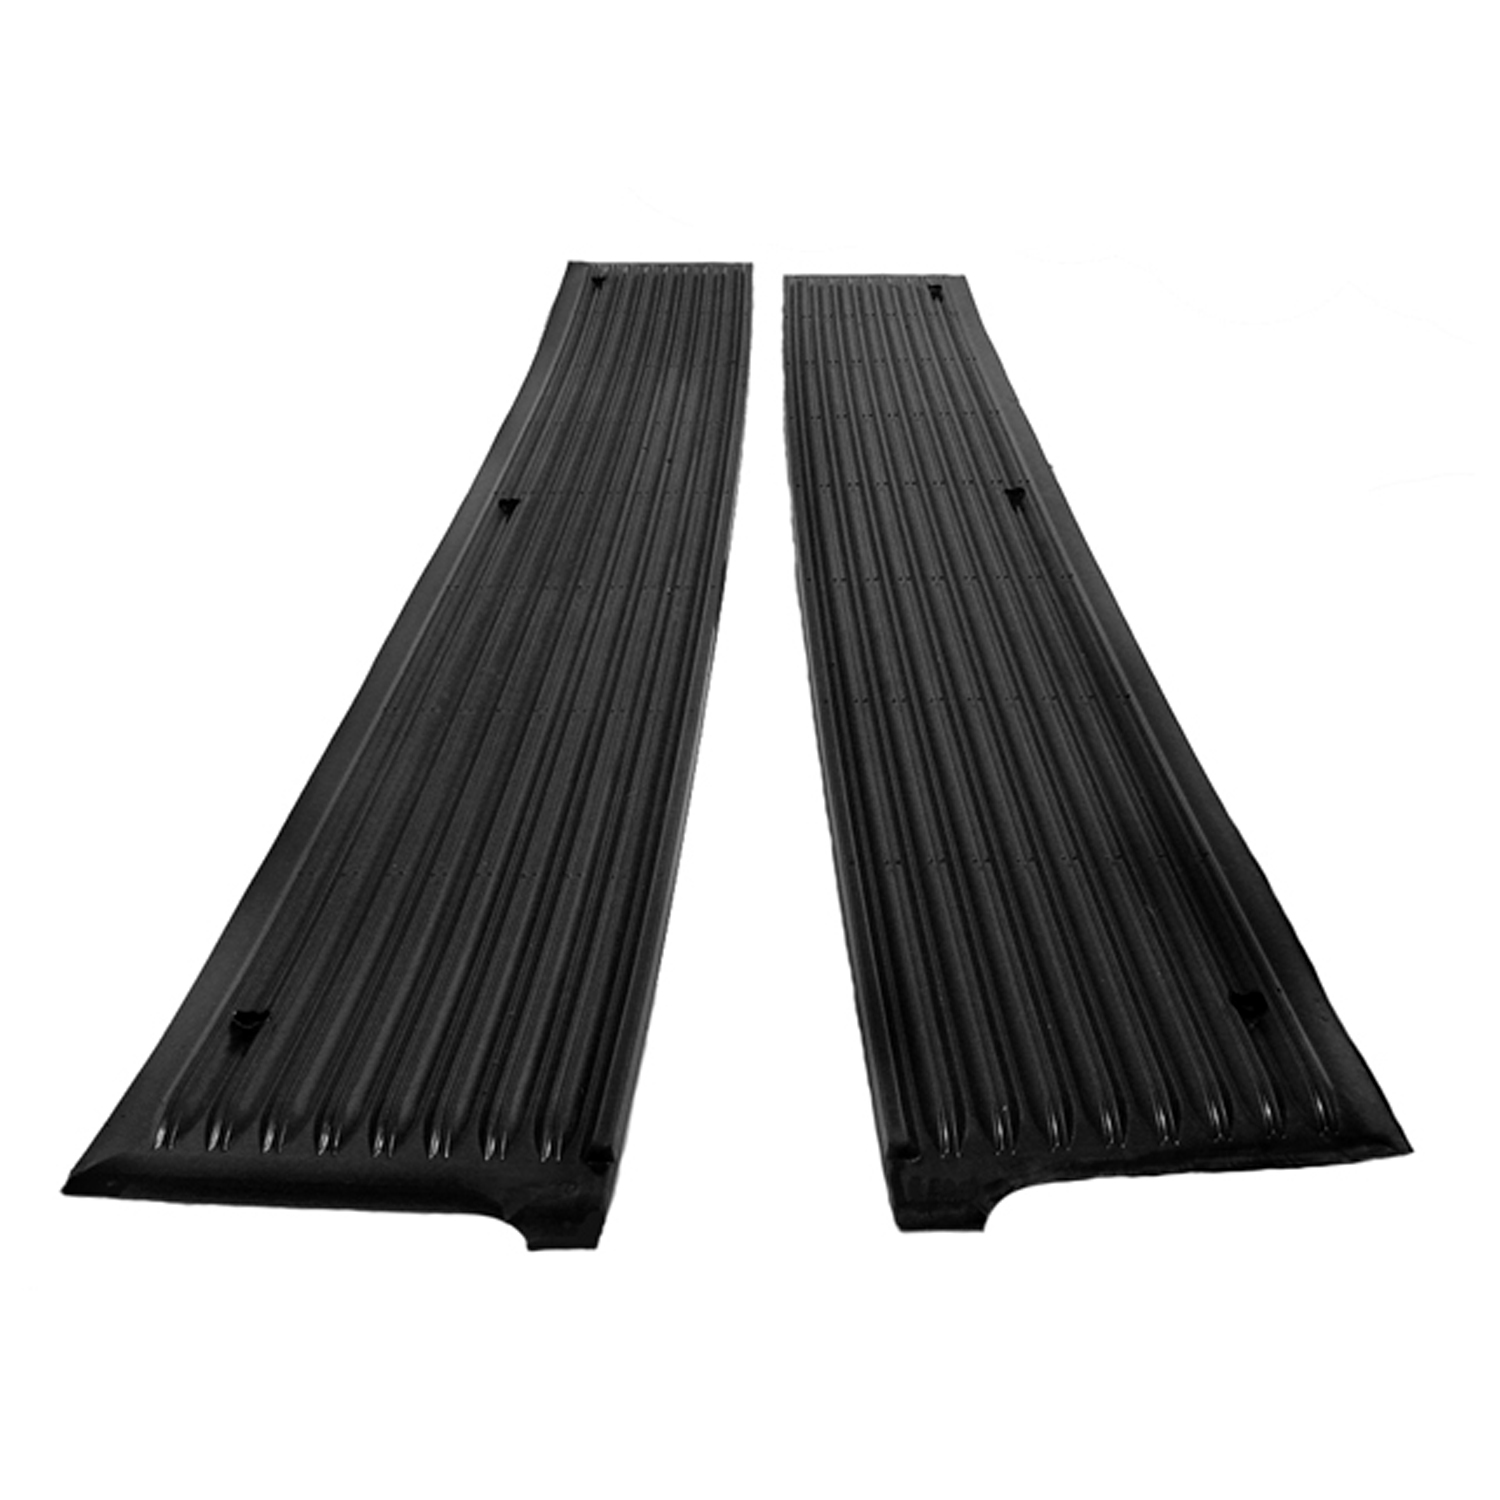 1946 Chevrolet Stylemaster Series Inside running board covers (step-plate pads)-RB 1903